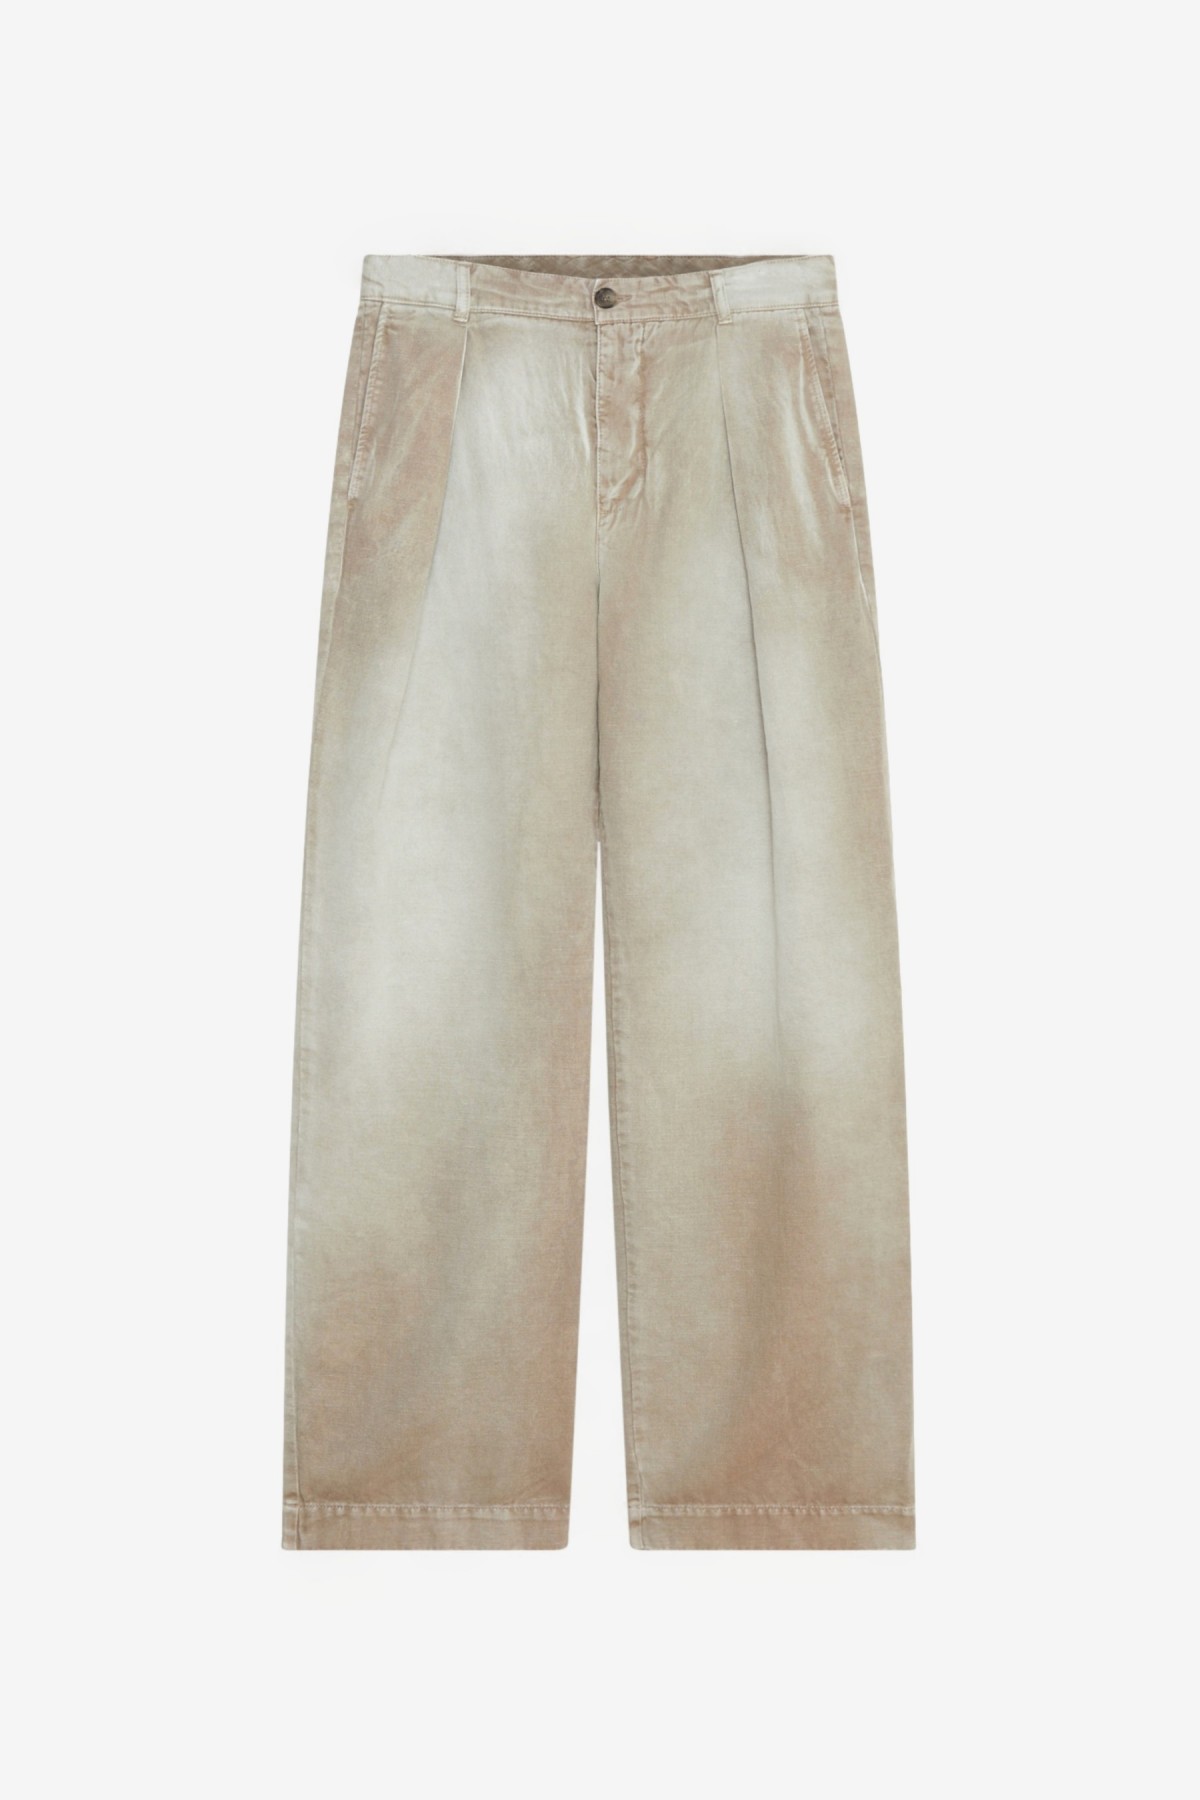 Wood Wood Fraser Pleated Chinos in 2536 Desert